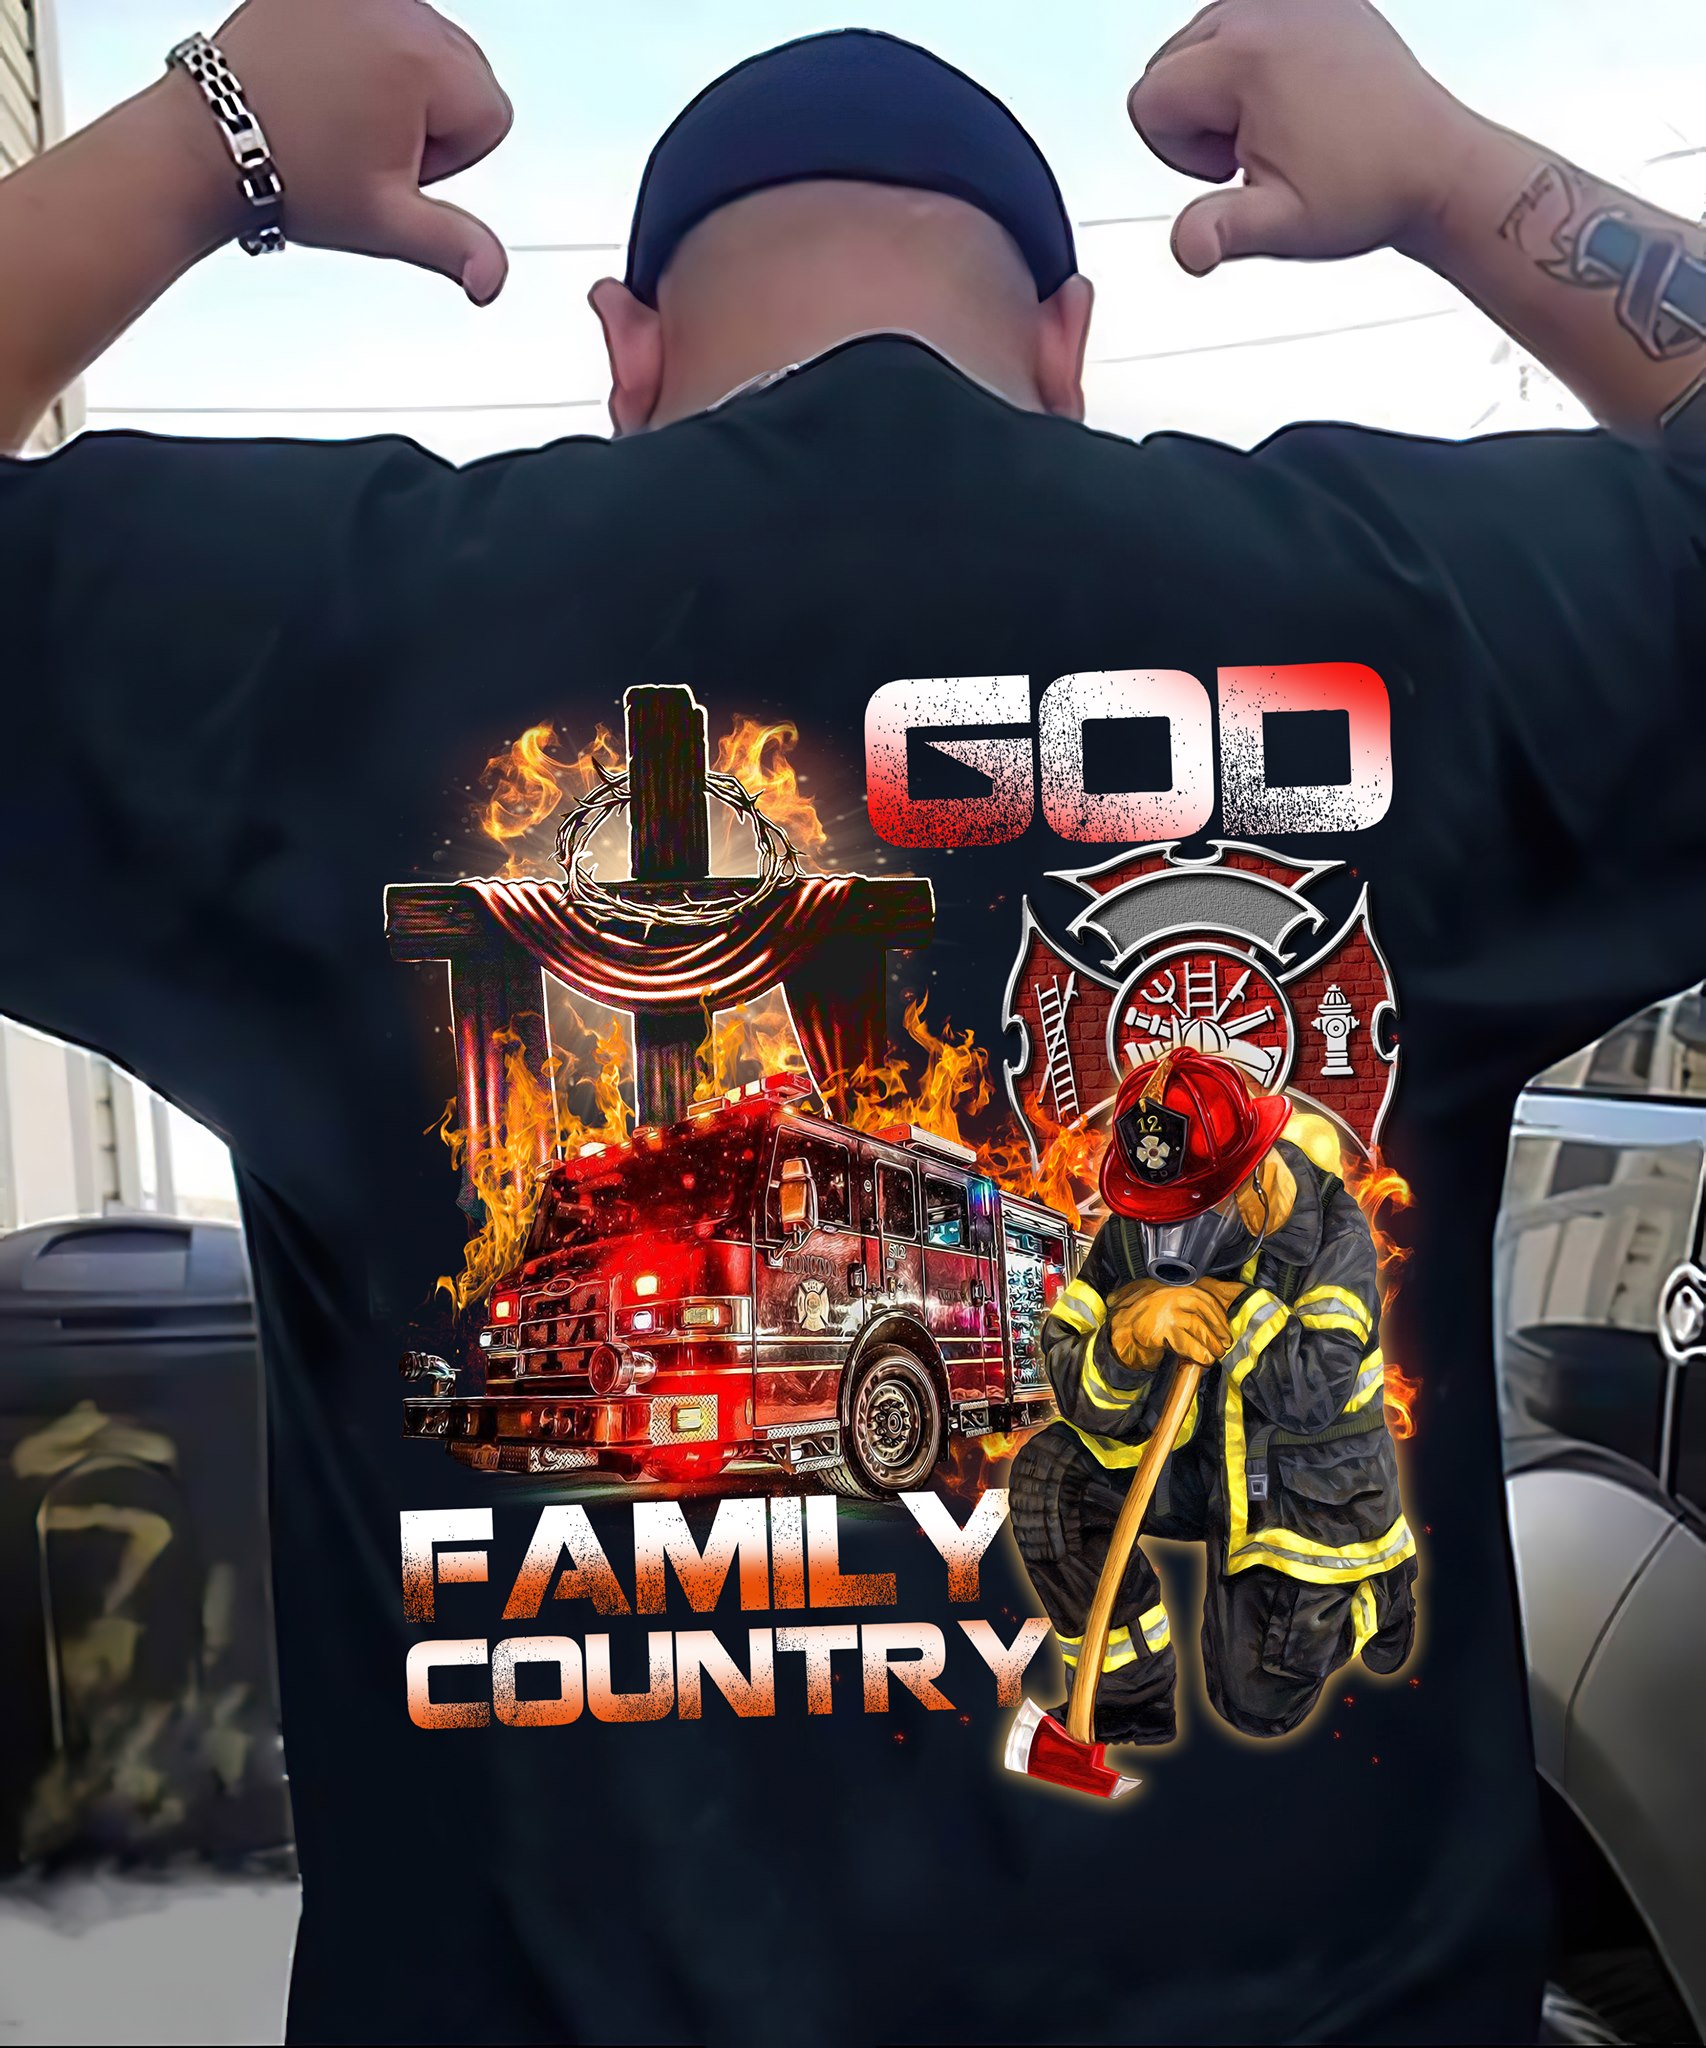 God and family country - Firefighter the job